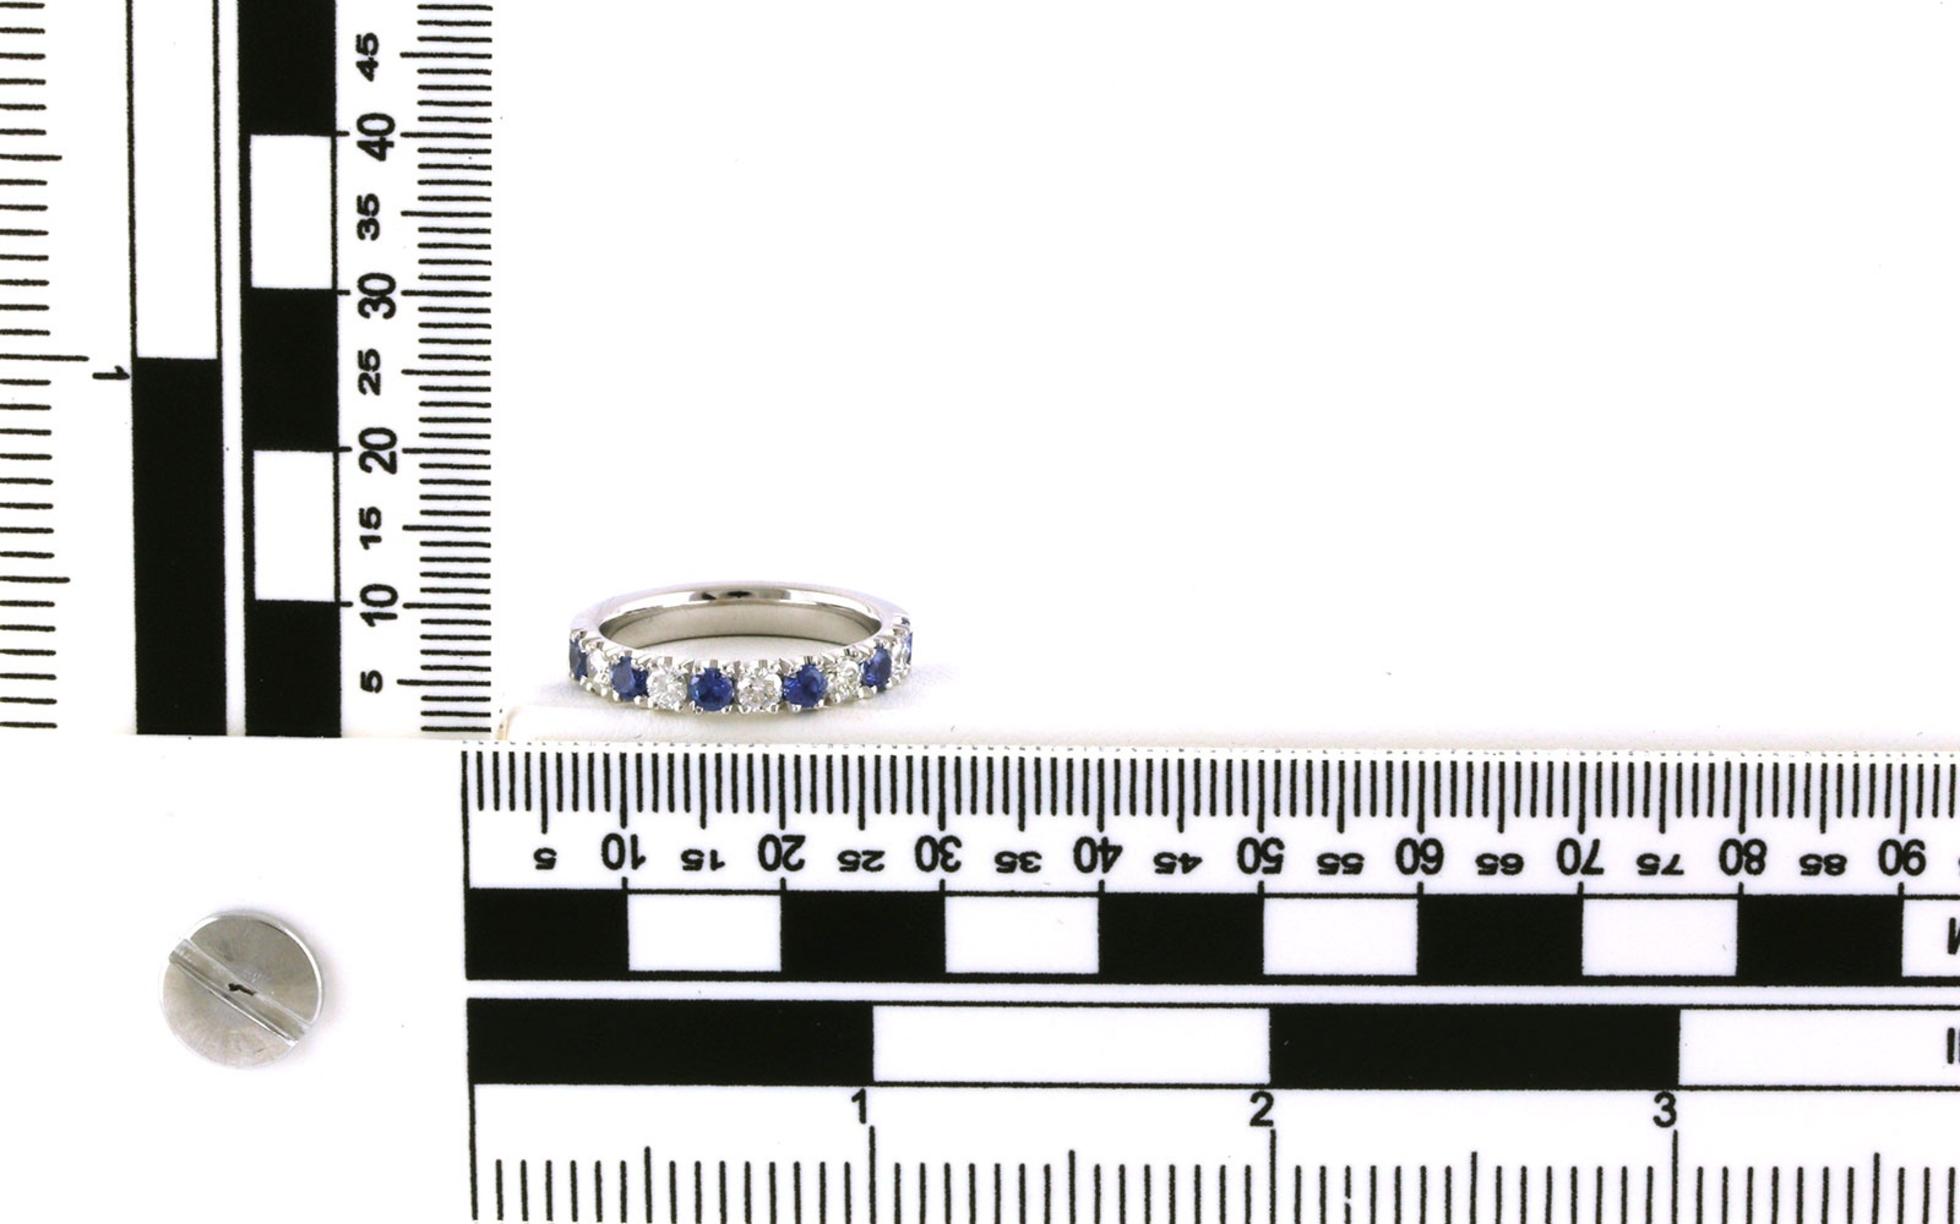 11-Stone Alternating Montana Yogo Sapphire and Diamond Band in White Gold (1.08cts TWT)